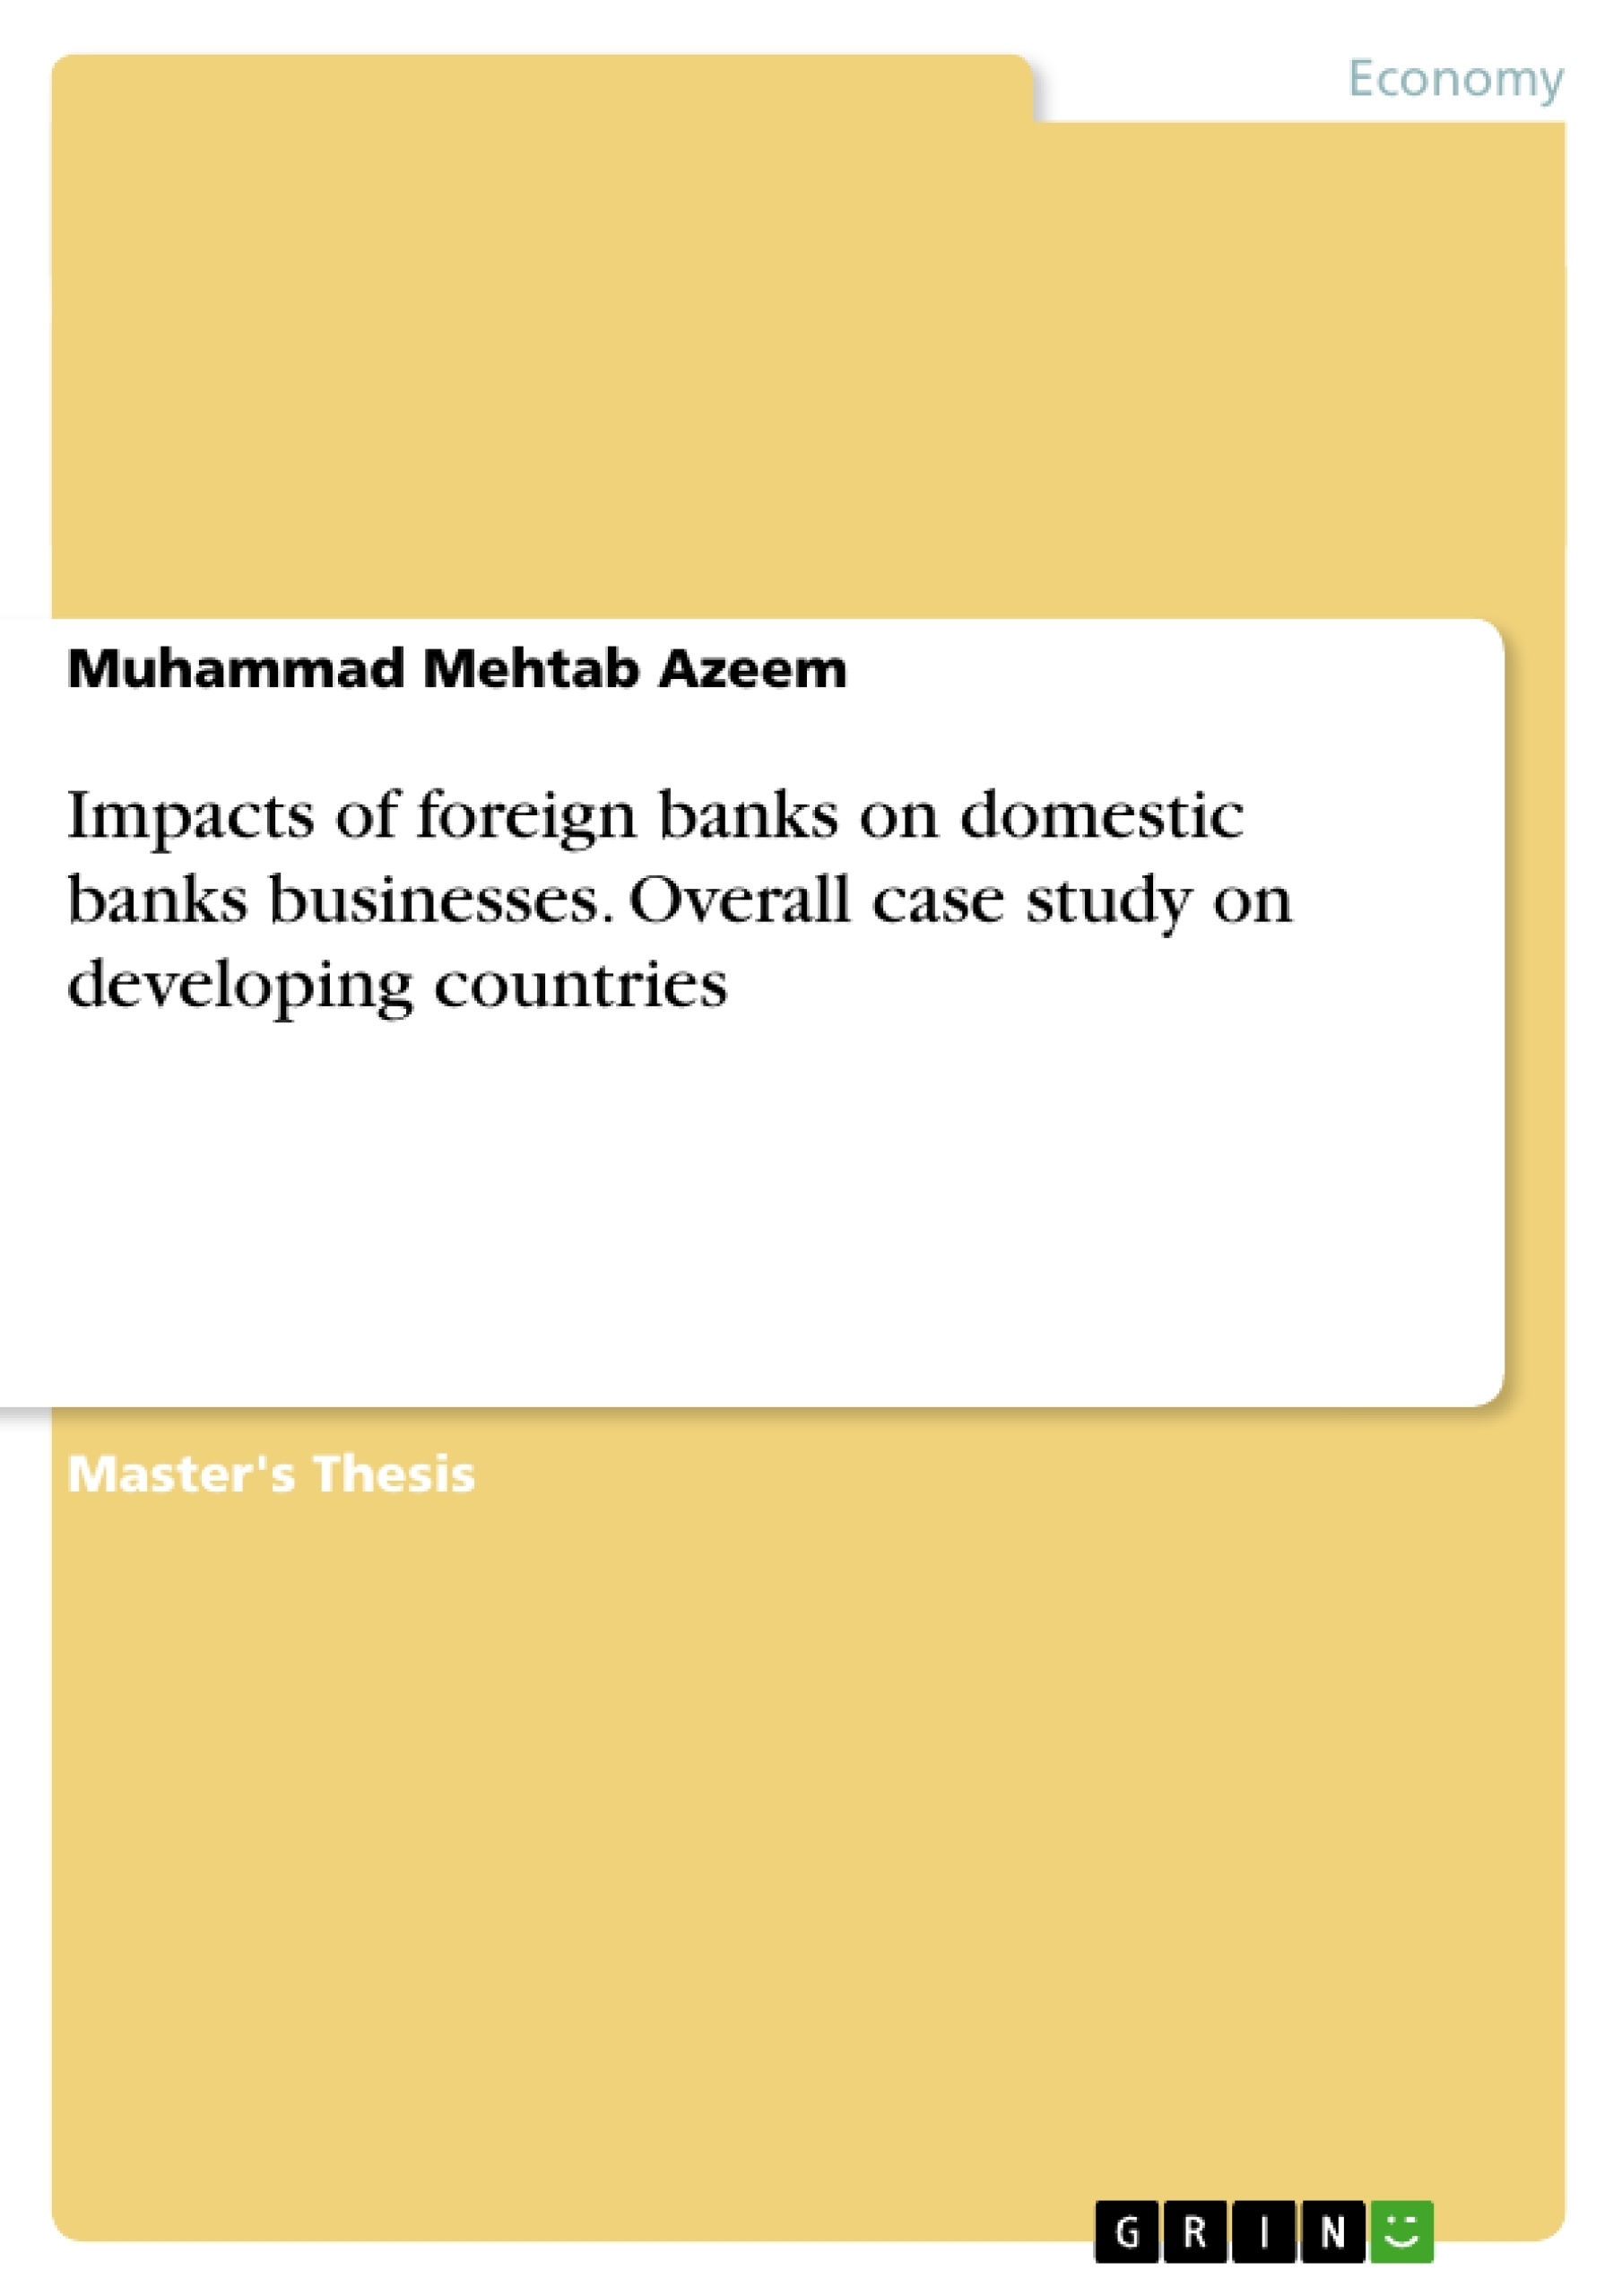 Titre: Impacts of foreign banks on domestic banks businesses. Overall case study on developing countries